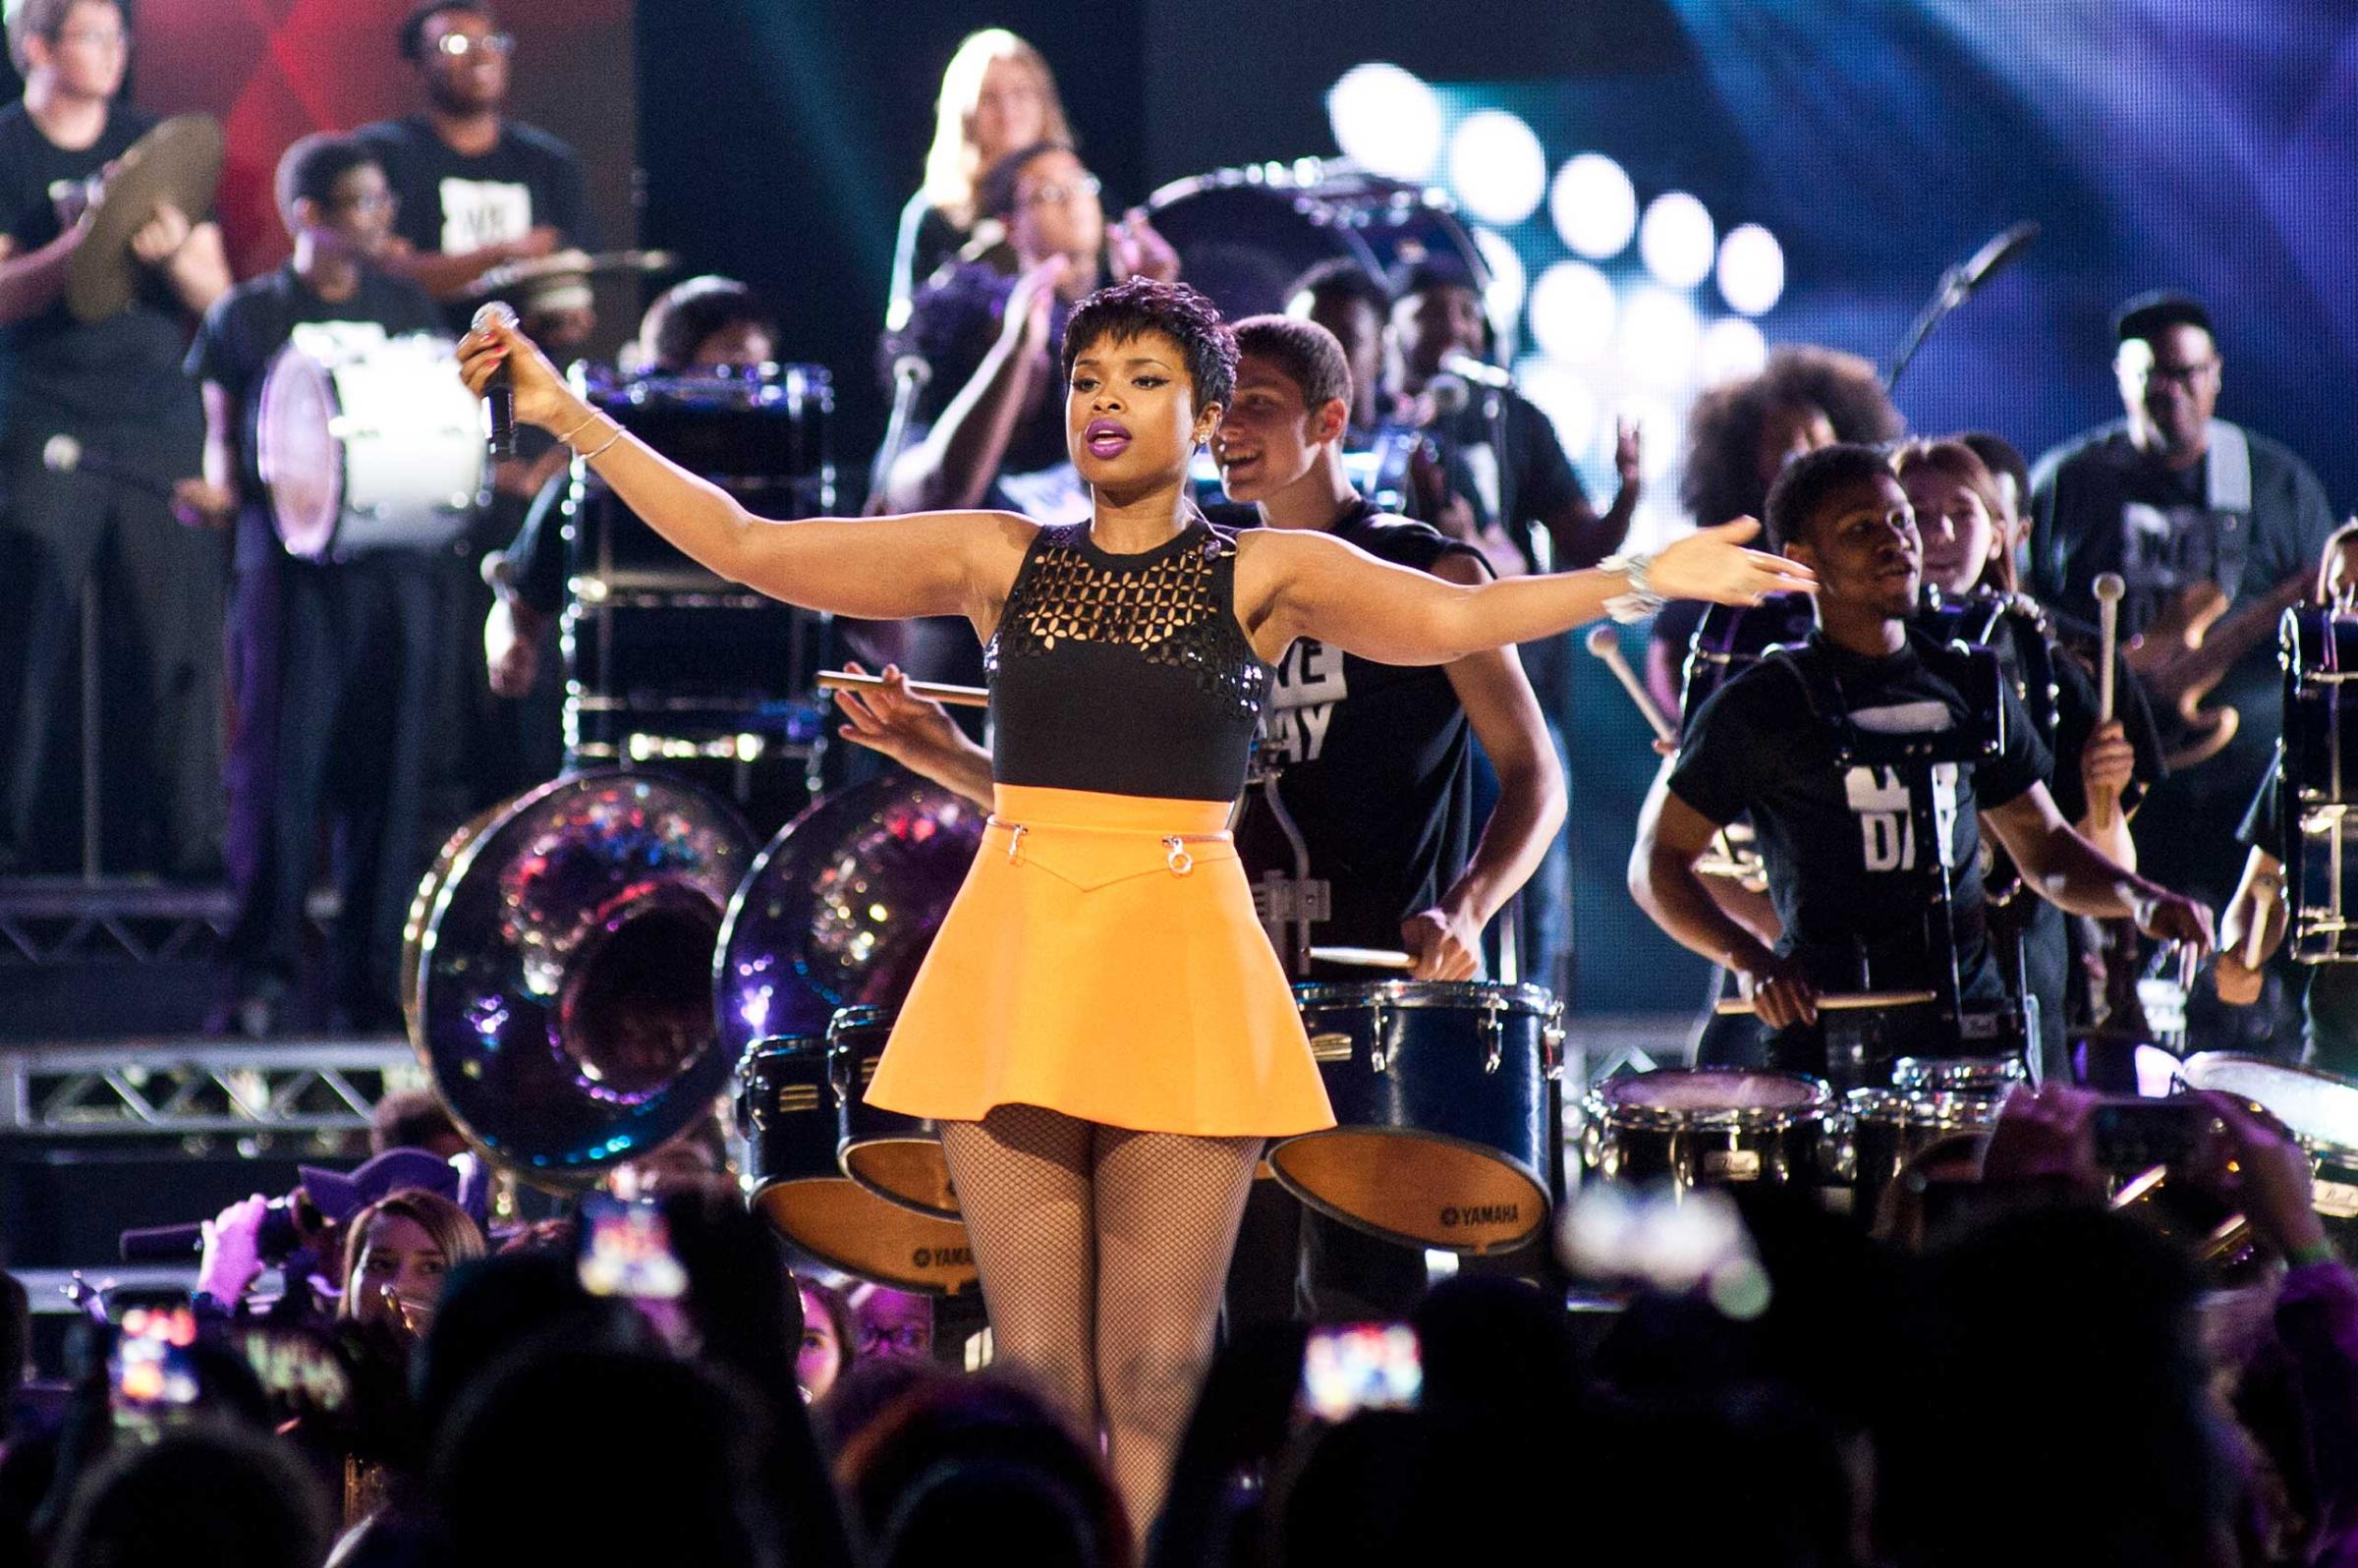 Jennifer Hudson performs at We Day at Allstate Arena in Rosemont, Ill. on April 30, 2015.